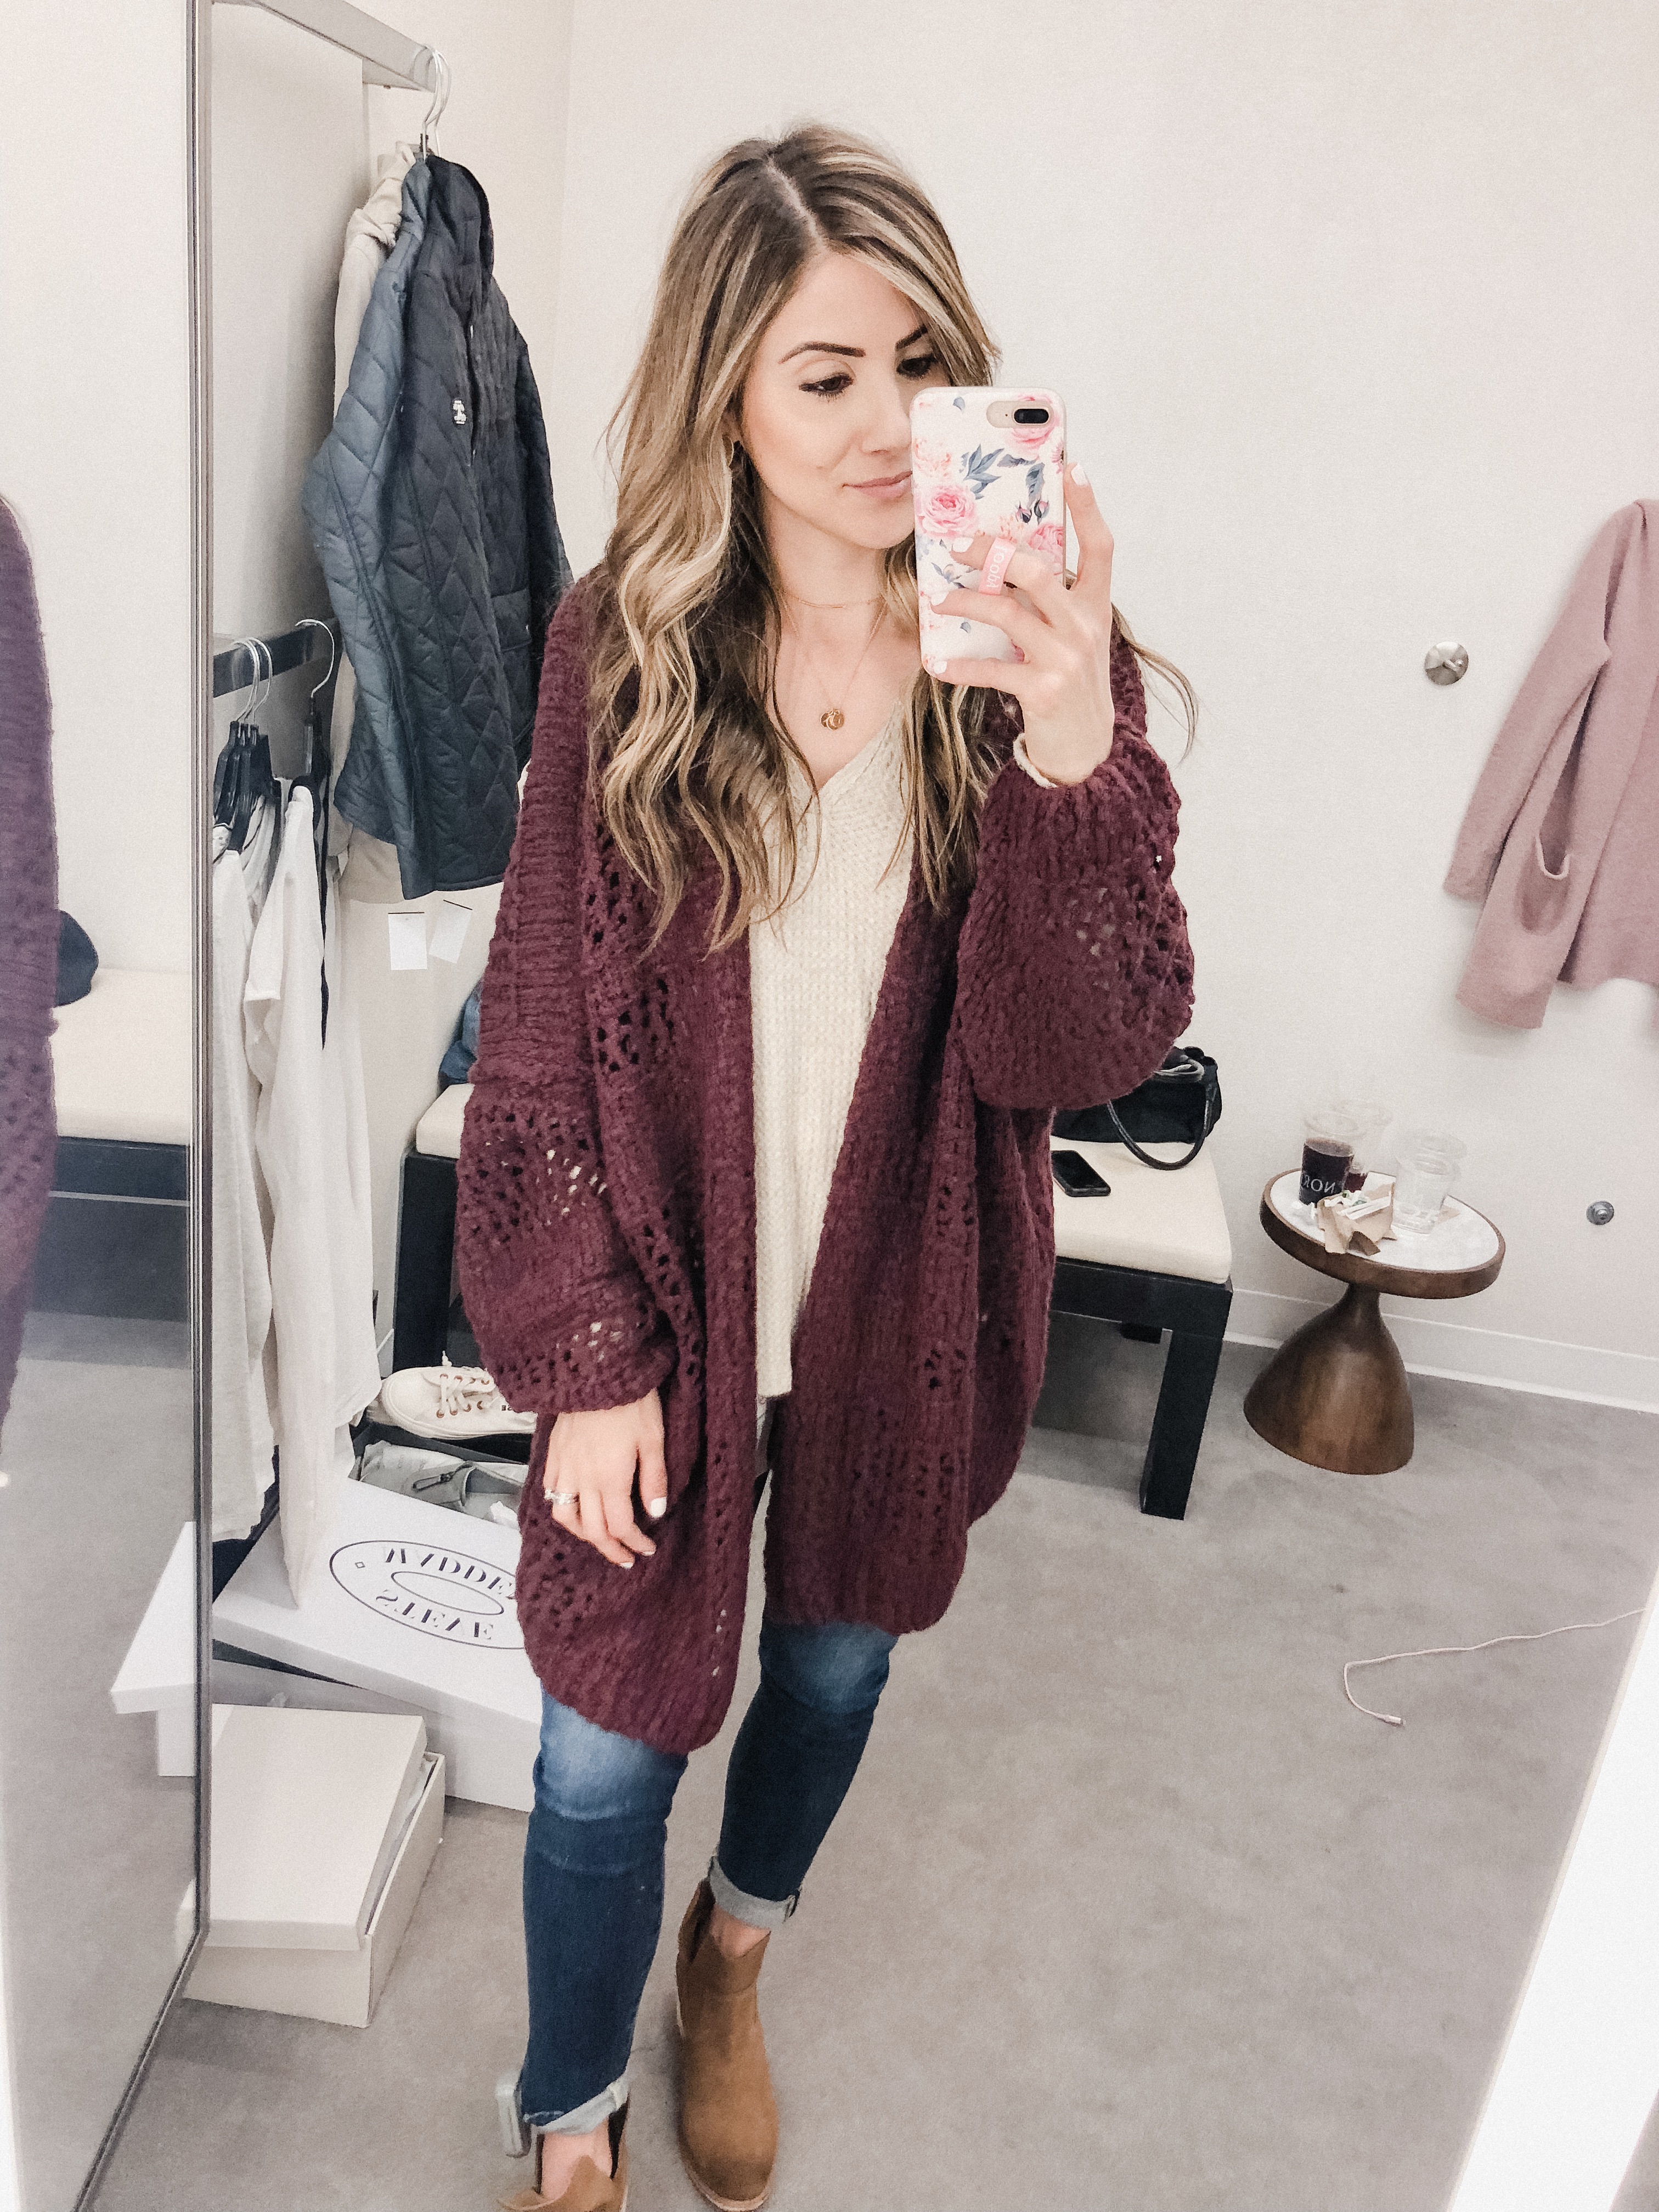 Life and style blogger Lauren McBride shares her fitting room try-on session for the Nordstrom Anniversary Sale 2018.